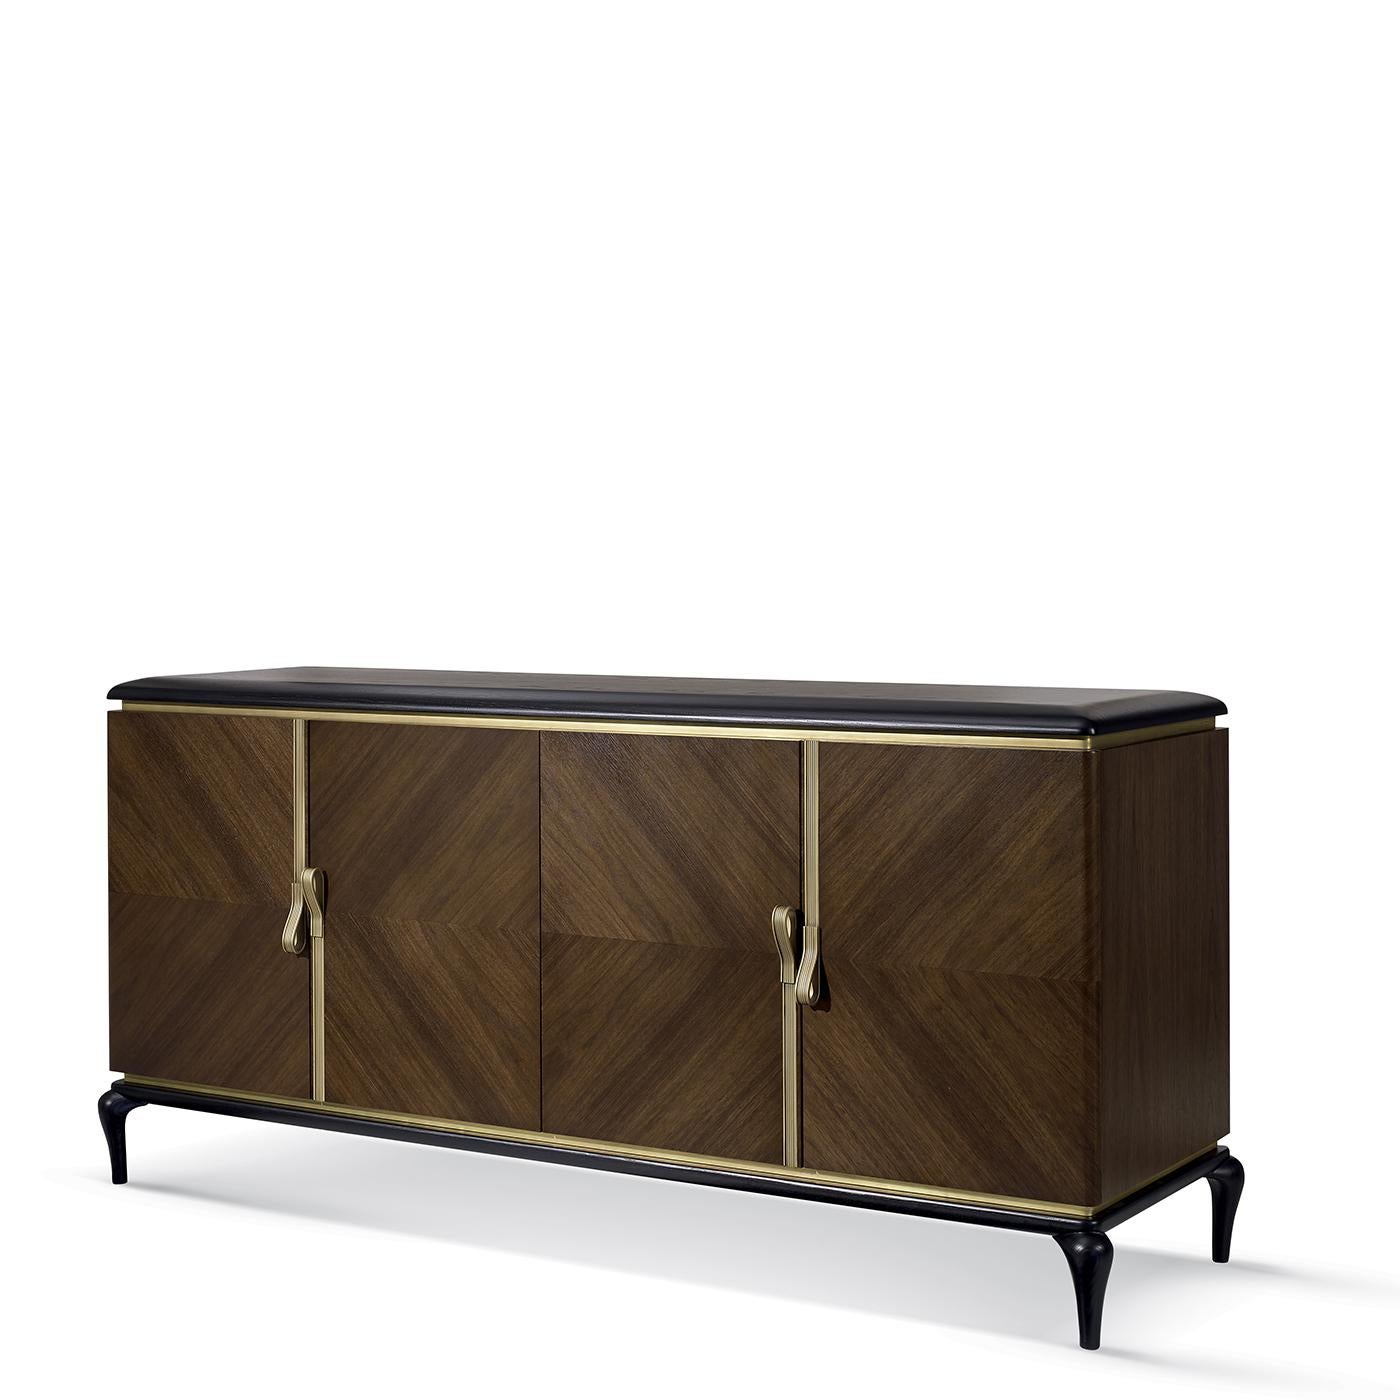 This sideboard merges traditional craftsmanship and modern allure in a harmonious design. The flamed ash and Canaletto walnut doors boast splendid diamond-shaped marquetry with handles and profile in burnished brass. The plywood and ash-veneered MDF